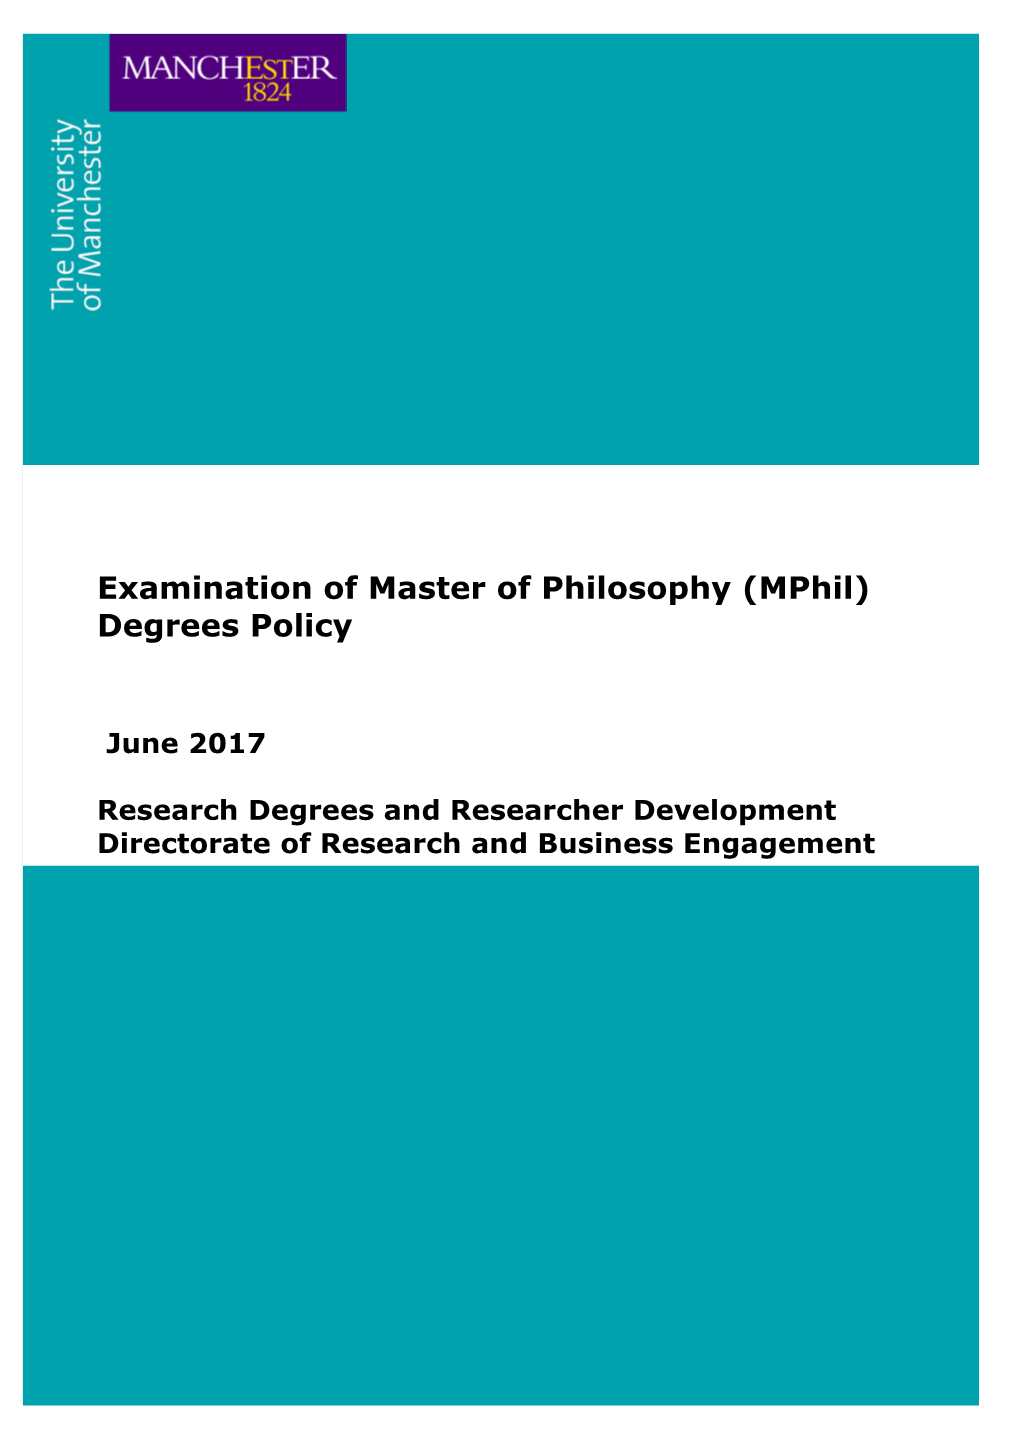 Examination of Master of Philosophy (Mphil) Degrees Policy June 2014